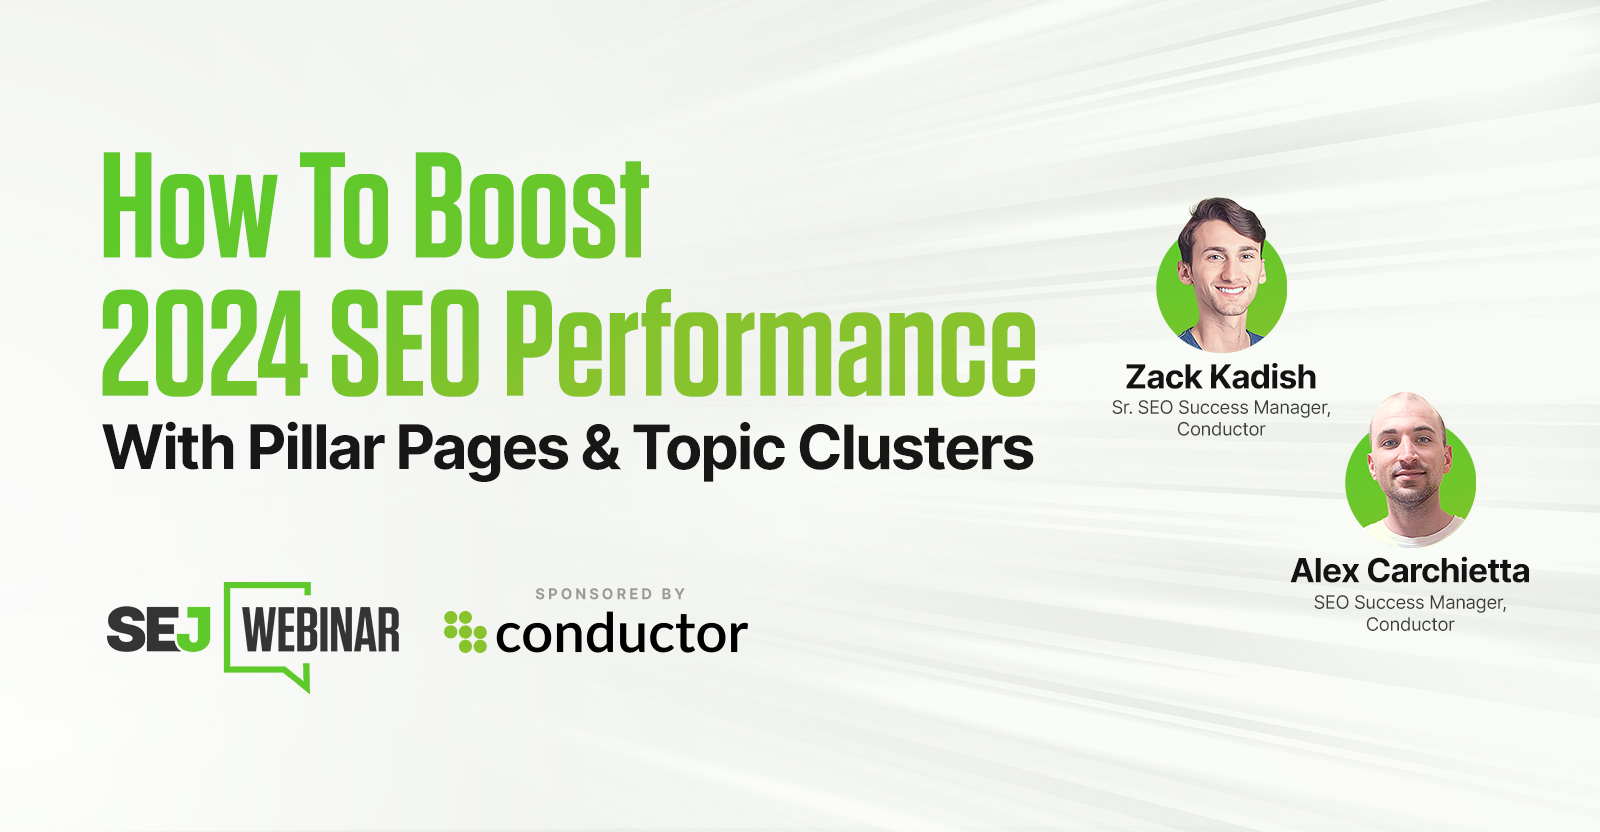 How To Boost 2024 SEO Performance With Pillar Pages & Topic Clusters via @sejournal, @hethr_campbell